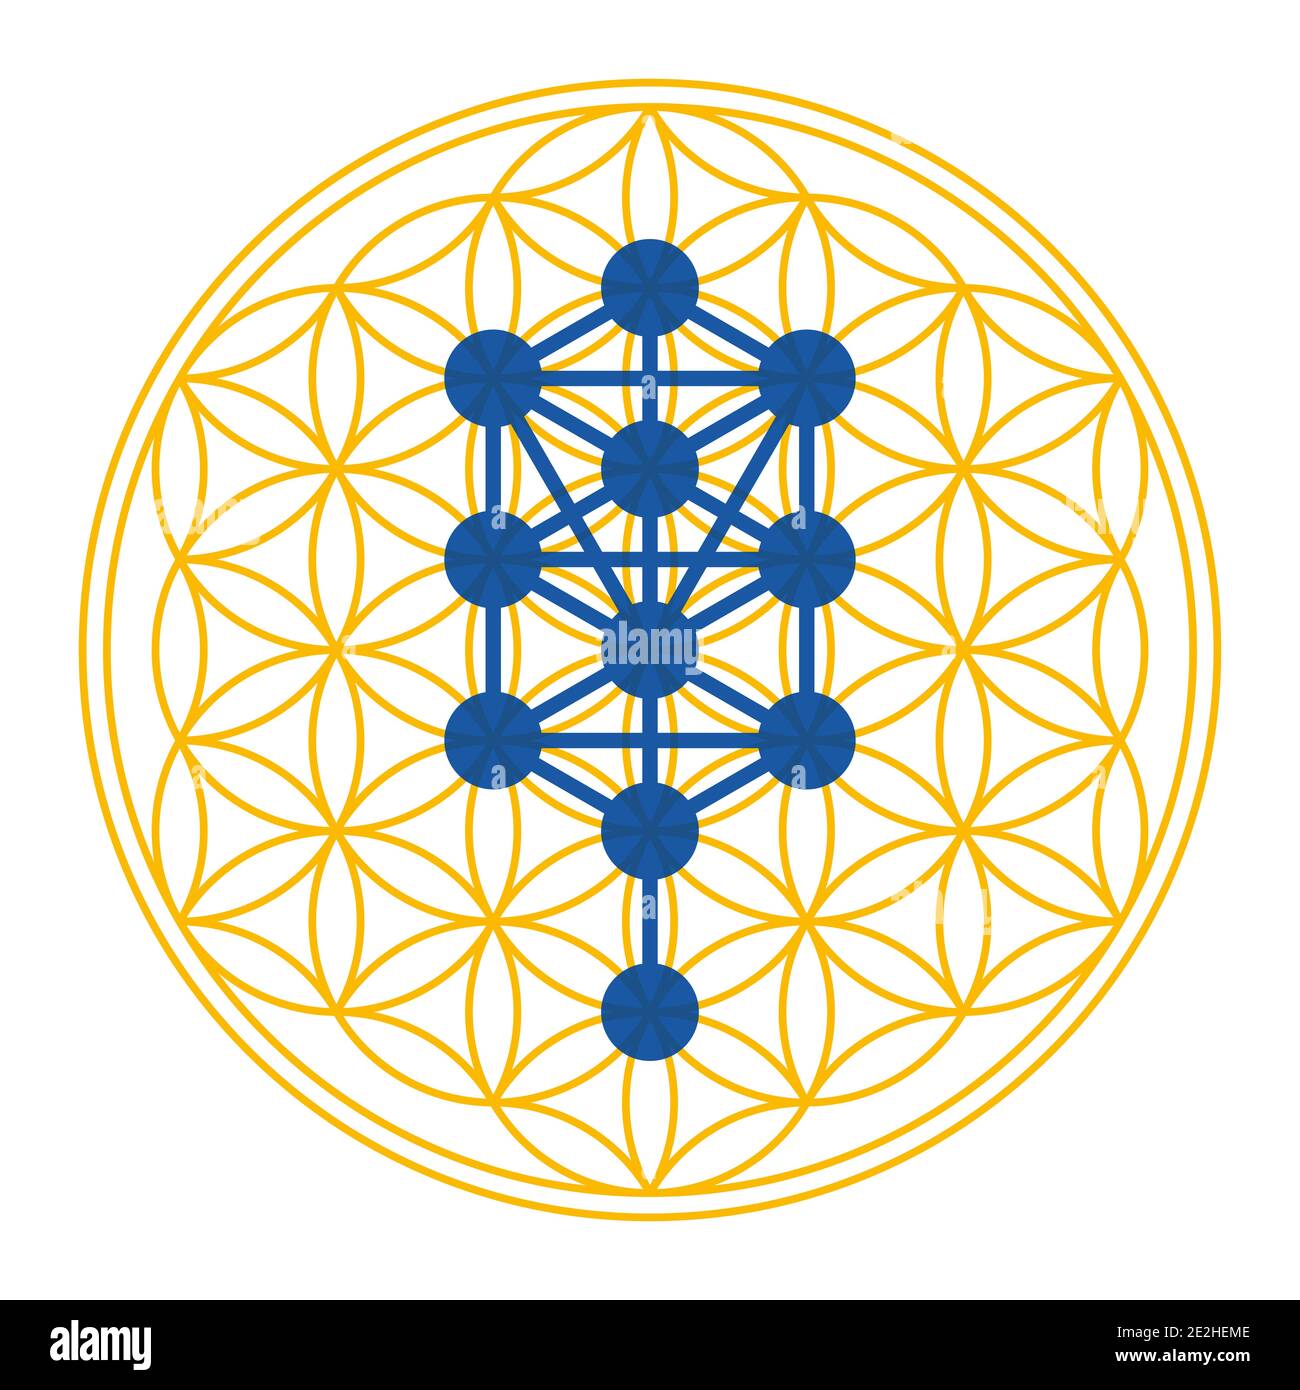 Tree of Life symbol derived from the Tree of Life. Diagram, used in mystical traditions such as Hermetic Qabalah, over symbol of overlapping circles. Stock Photo